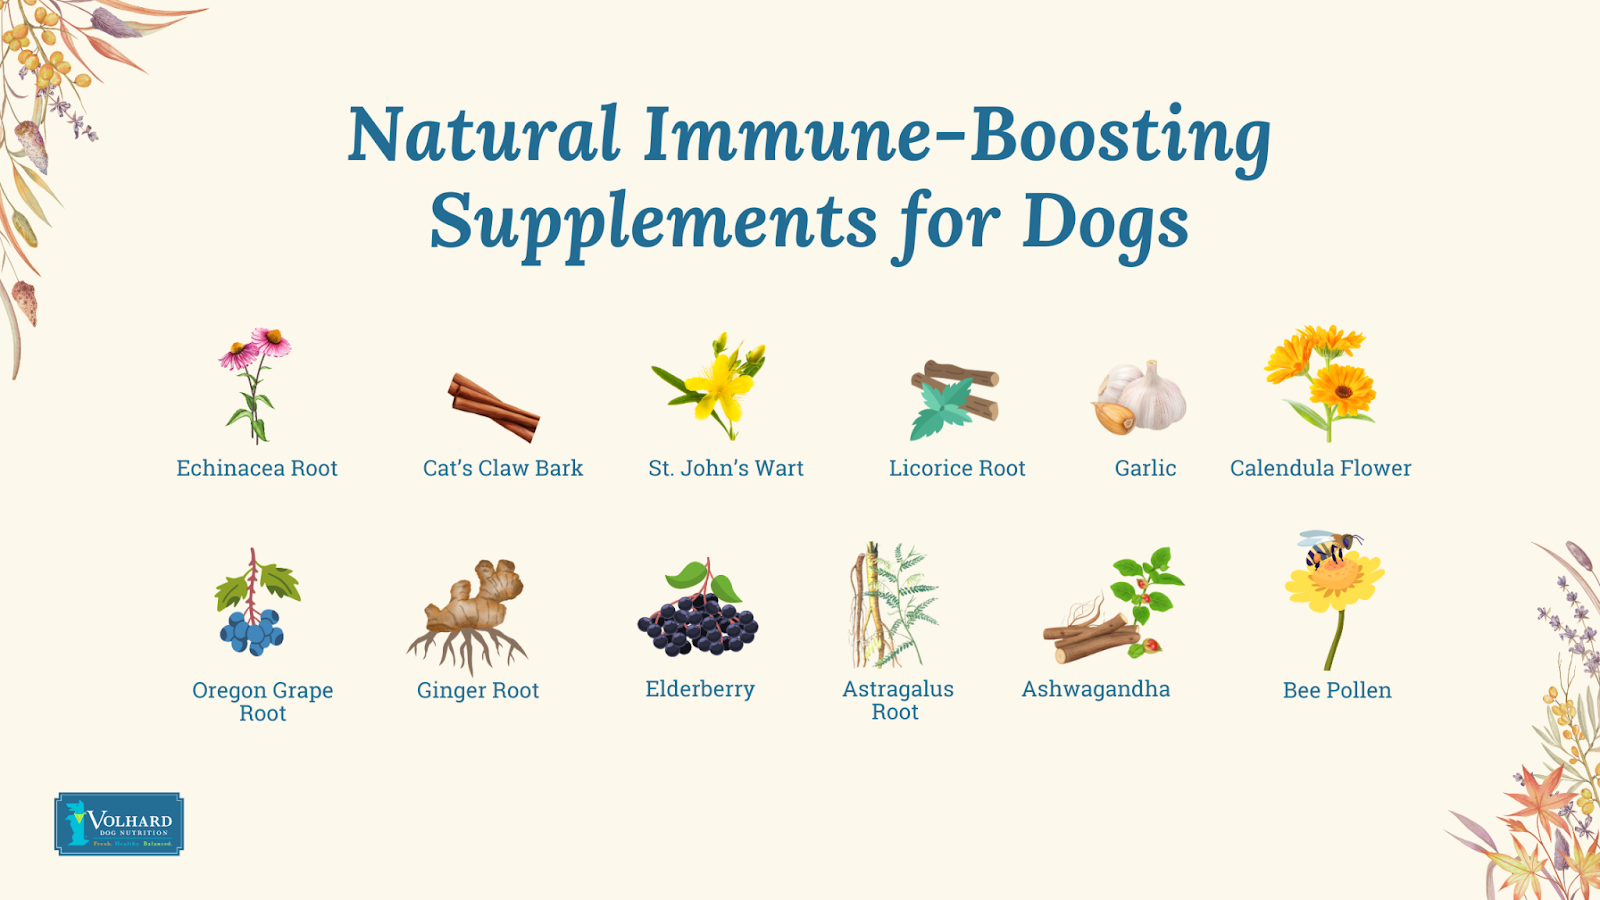 Natural immune-boosting supplements for dogs